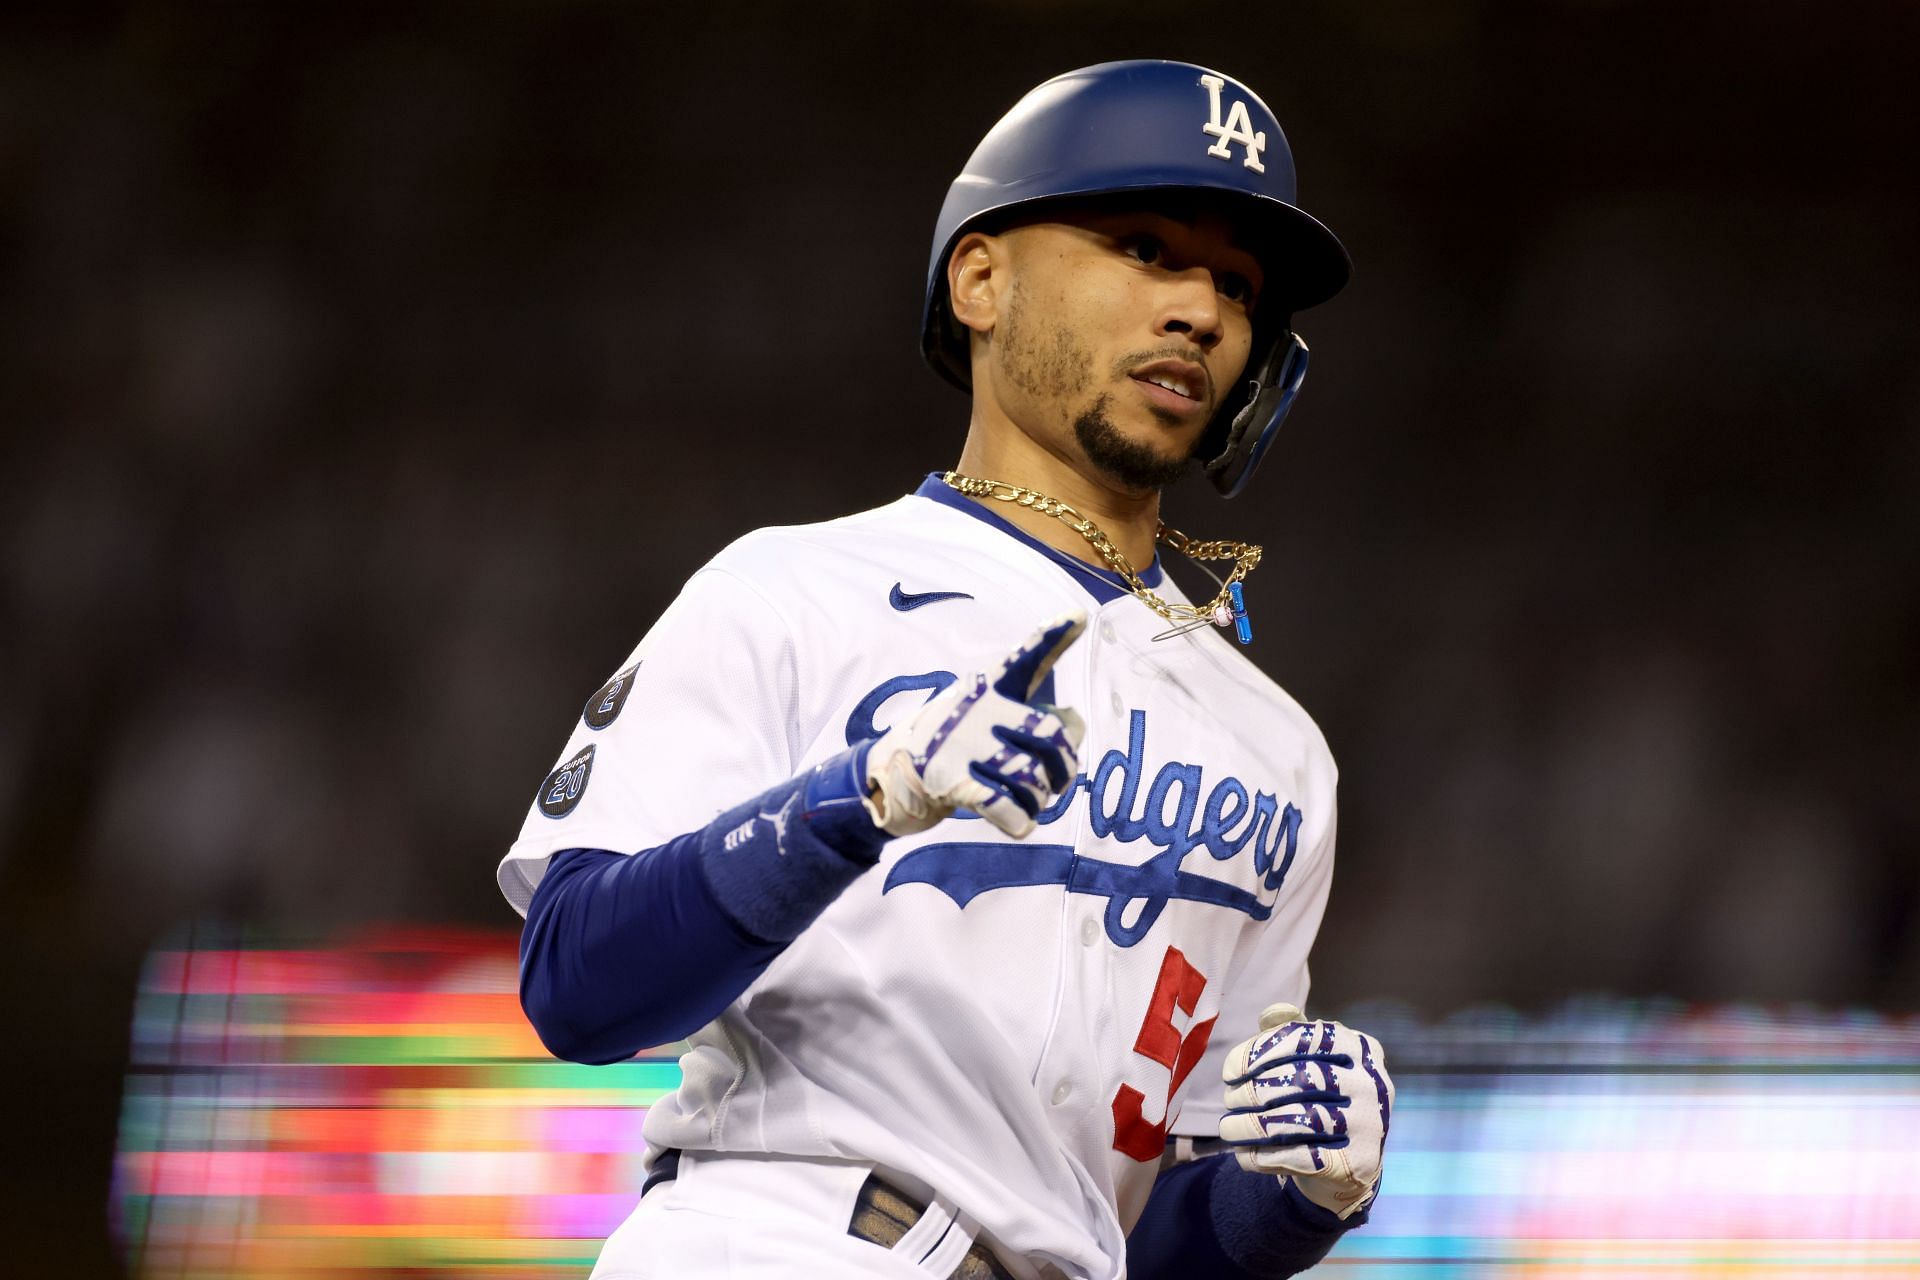 Dad Names Daughter After Dodgers Star Mookie Betts